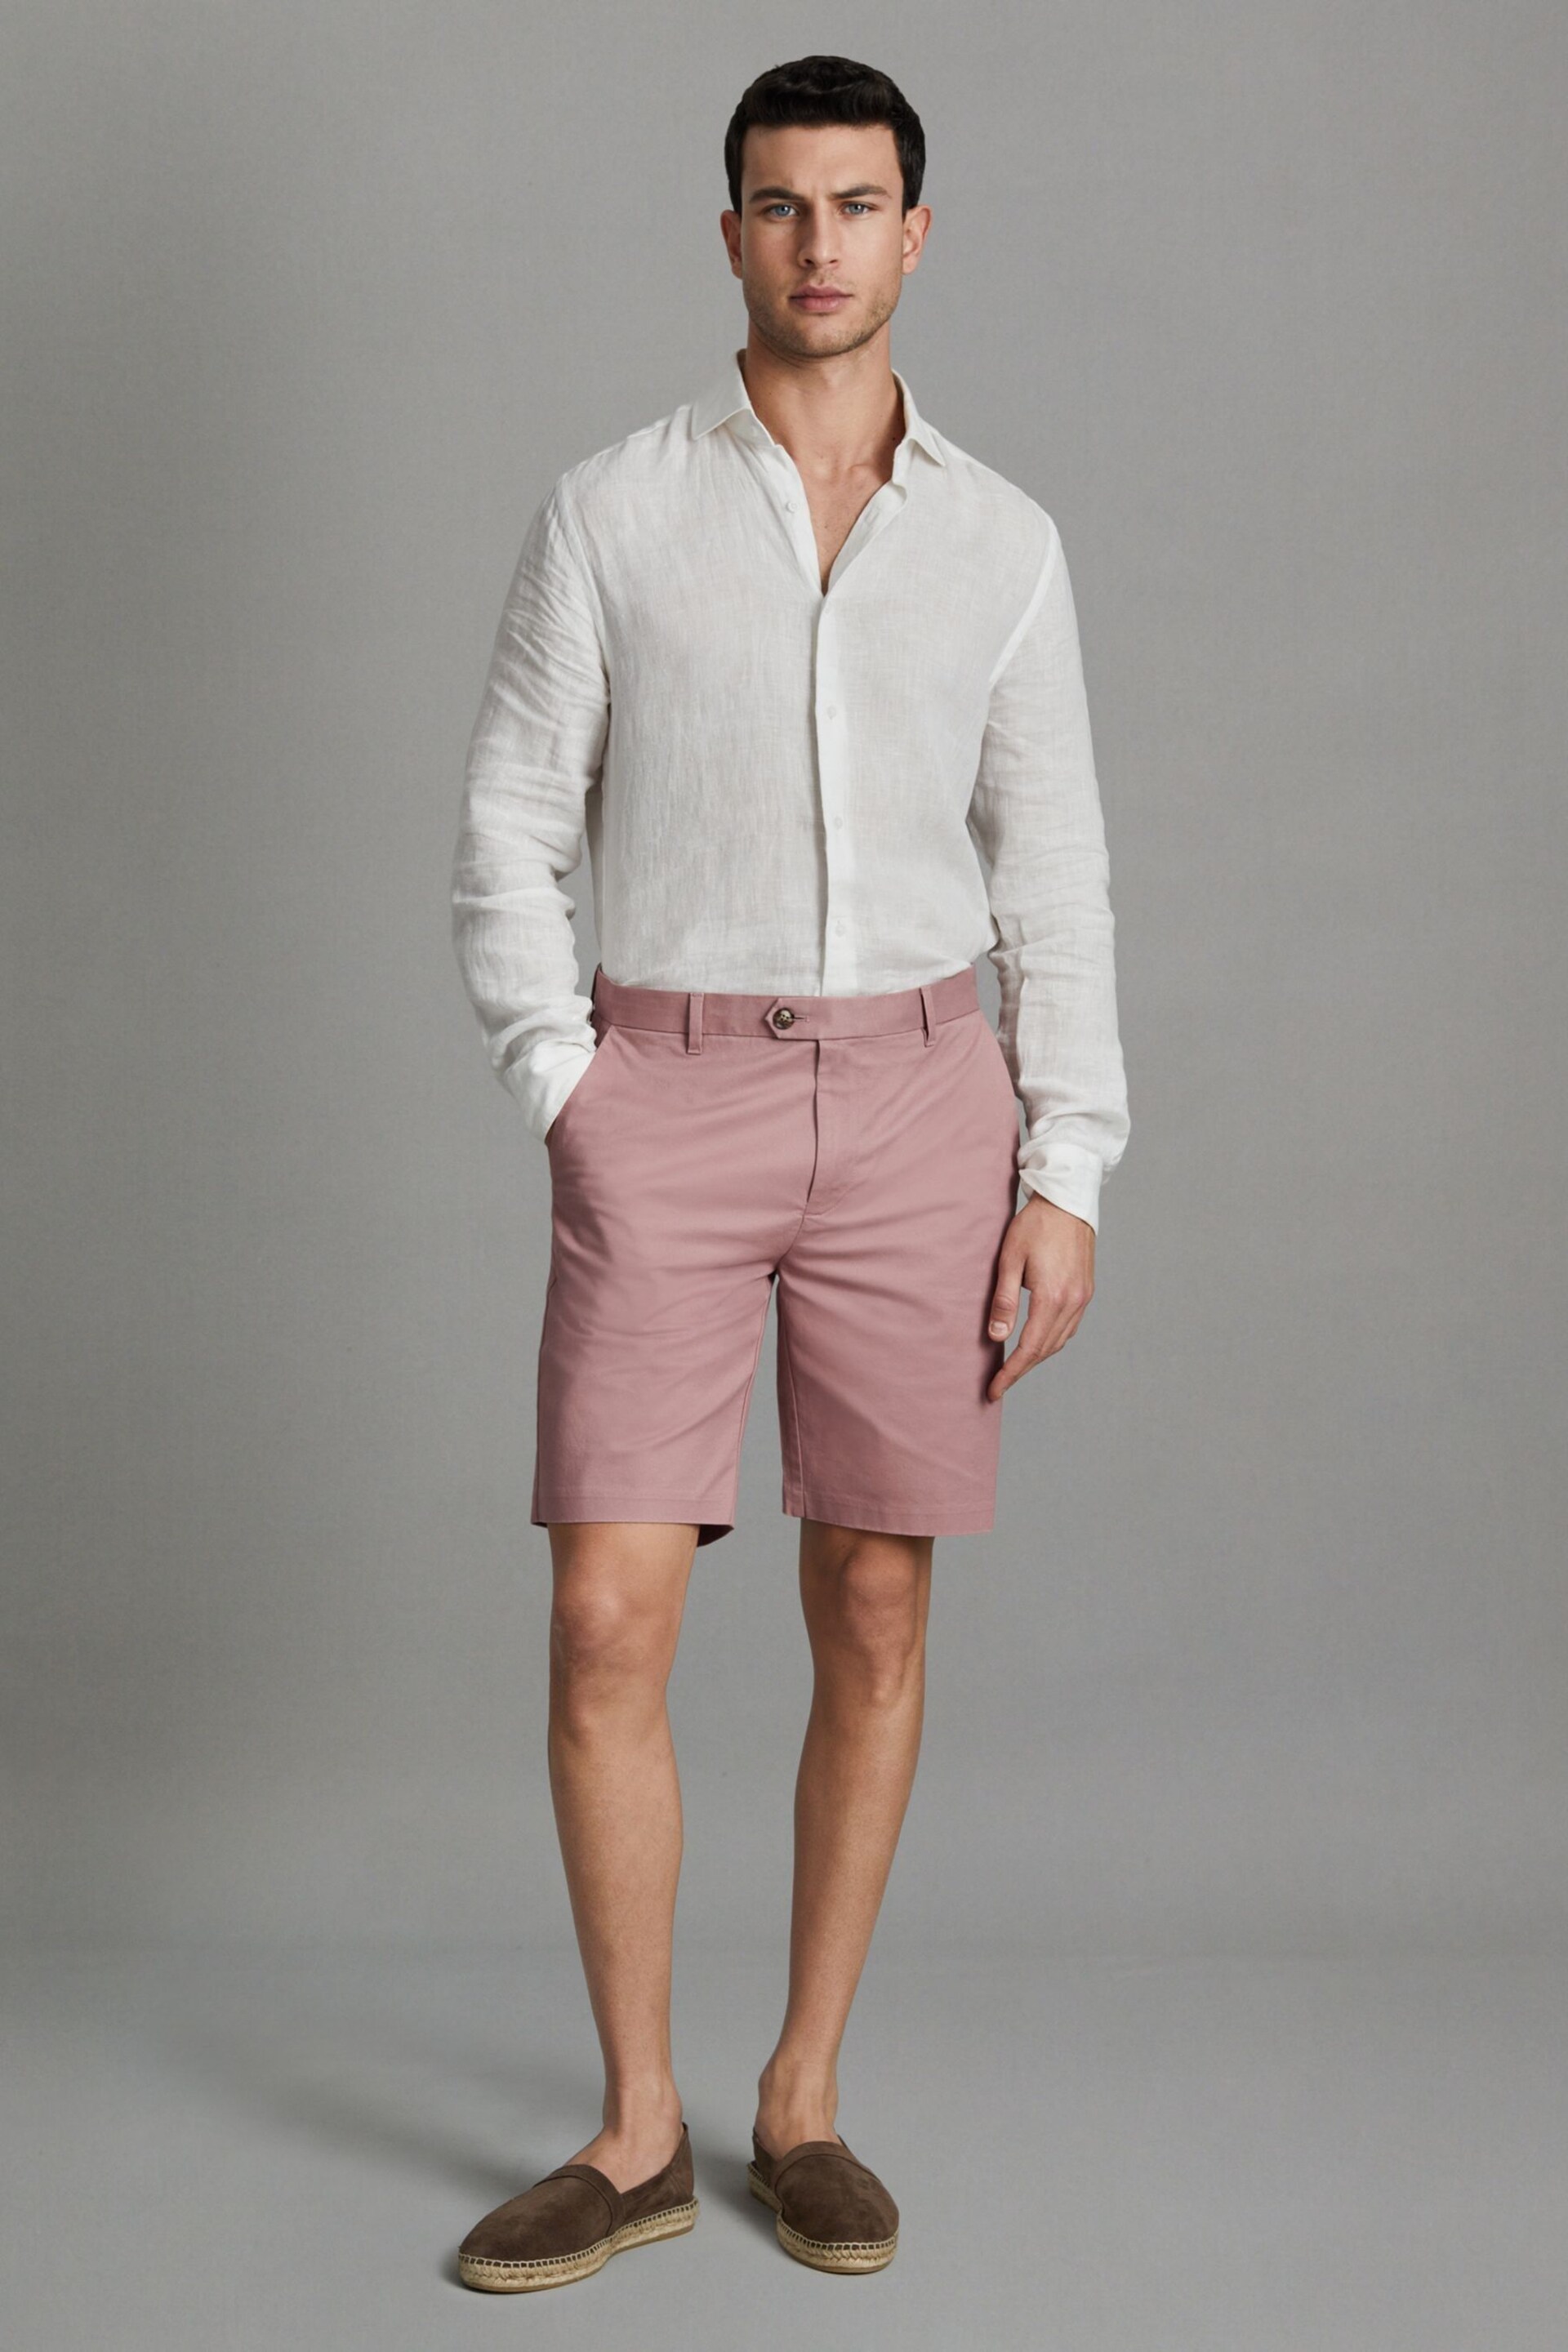 Reiss Dusty Pink Wicket Modern Fit Cotton Blend Chino Shorts - Image 6 of 7